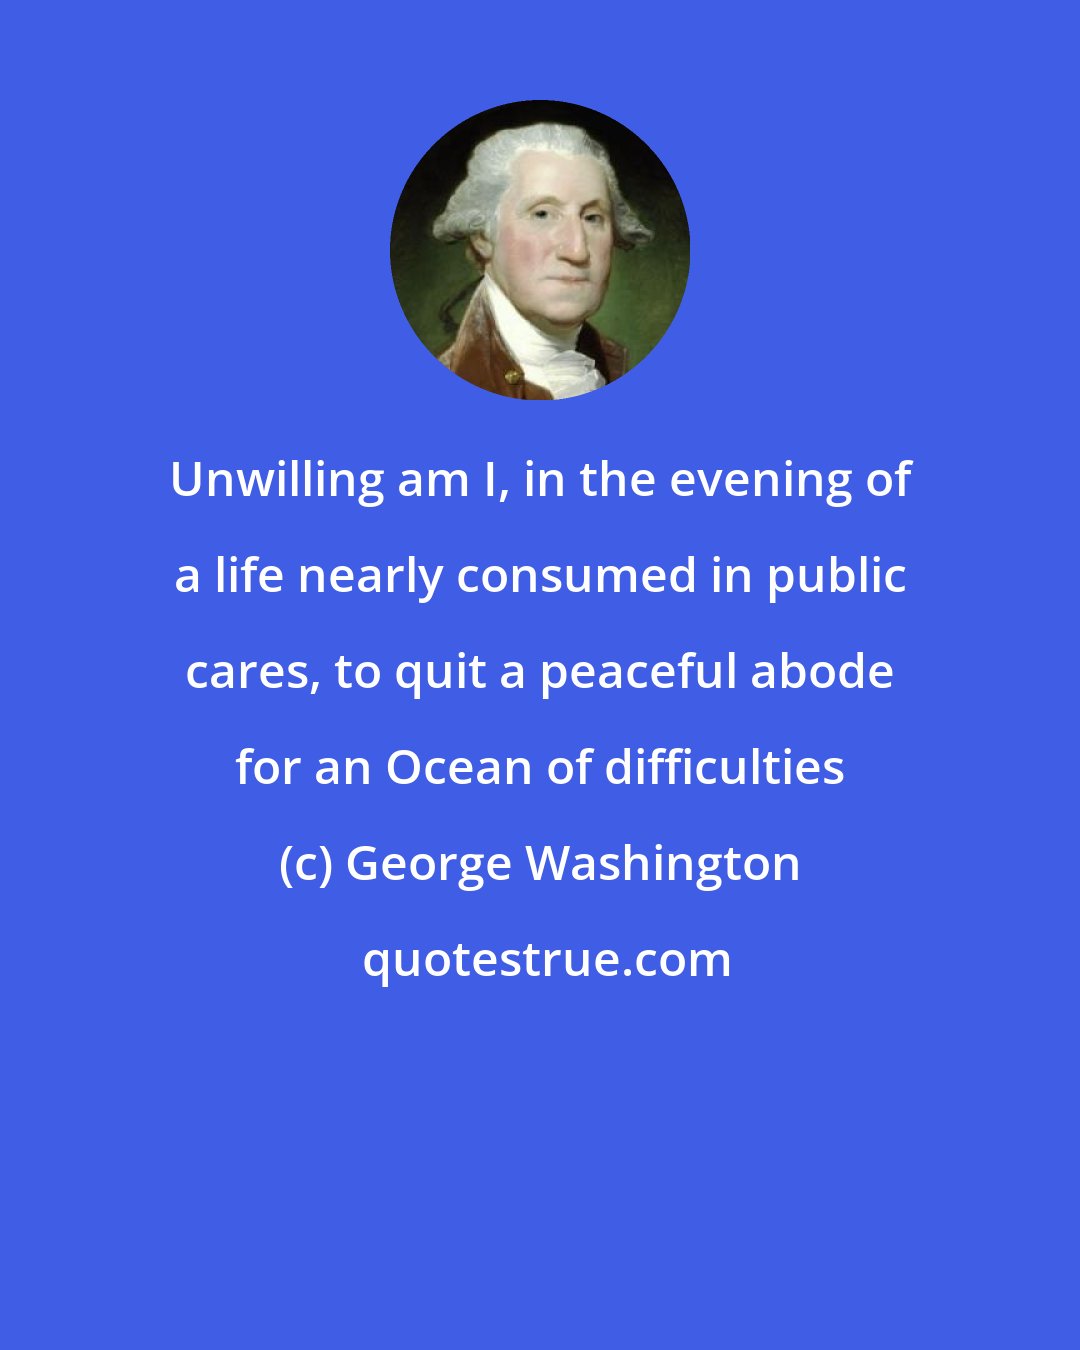 George Washington: Unwilling am I, in the evening of a life nearly consumed in public cares, to quit a peaceful abode for an Ocean of difficulties